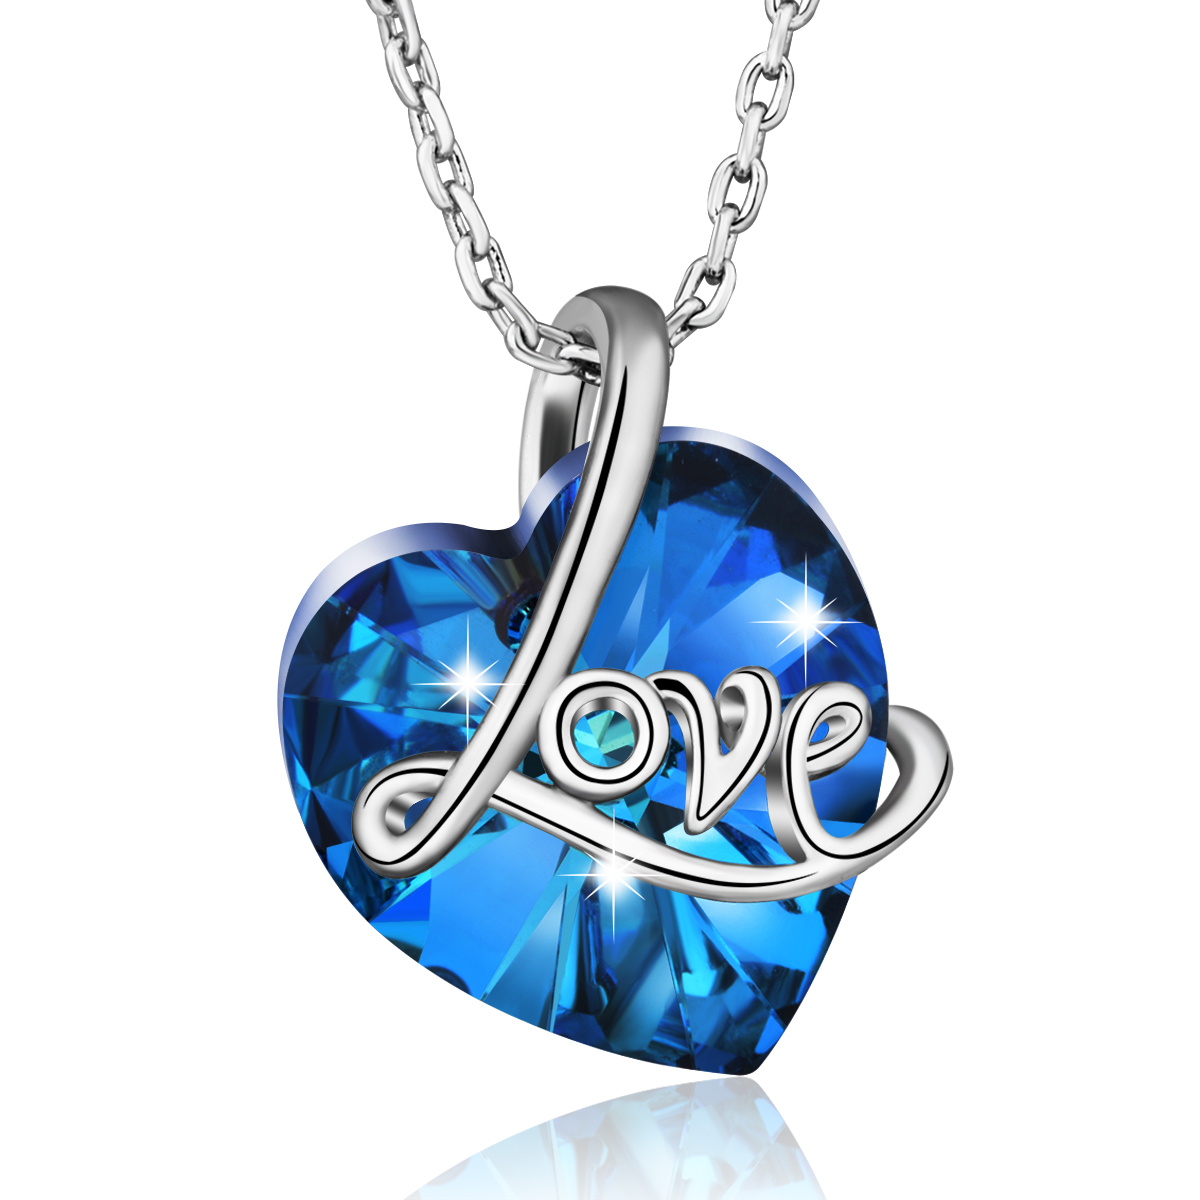 Merryshine Jewelry Wholesale Fashion Plated Platinum Blue Heart Crystal Pendant Necklace For Christmas Gift